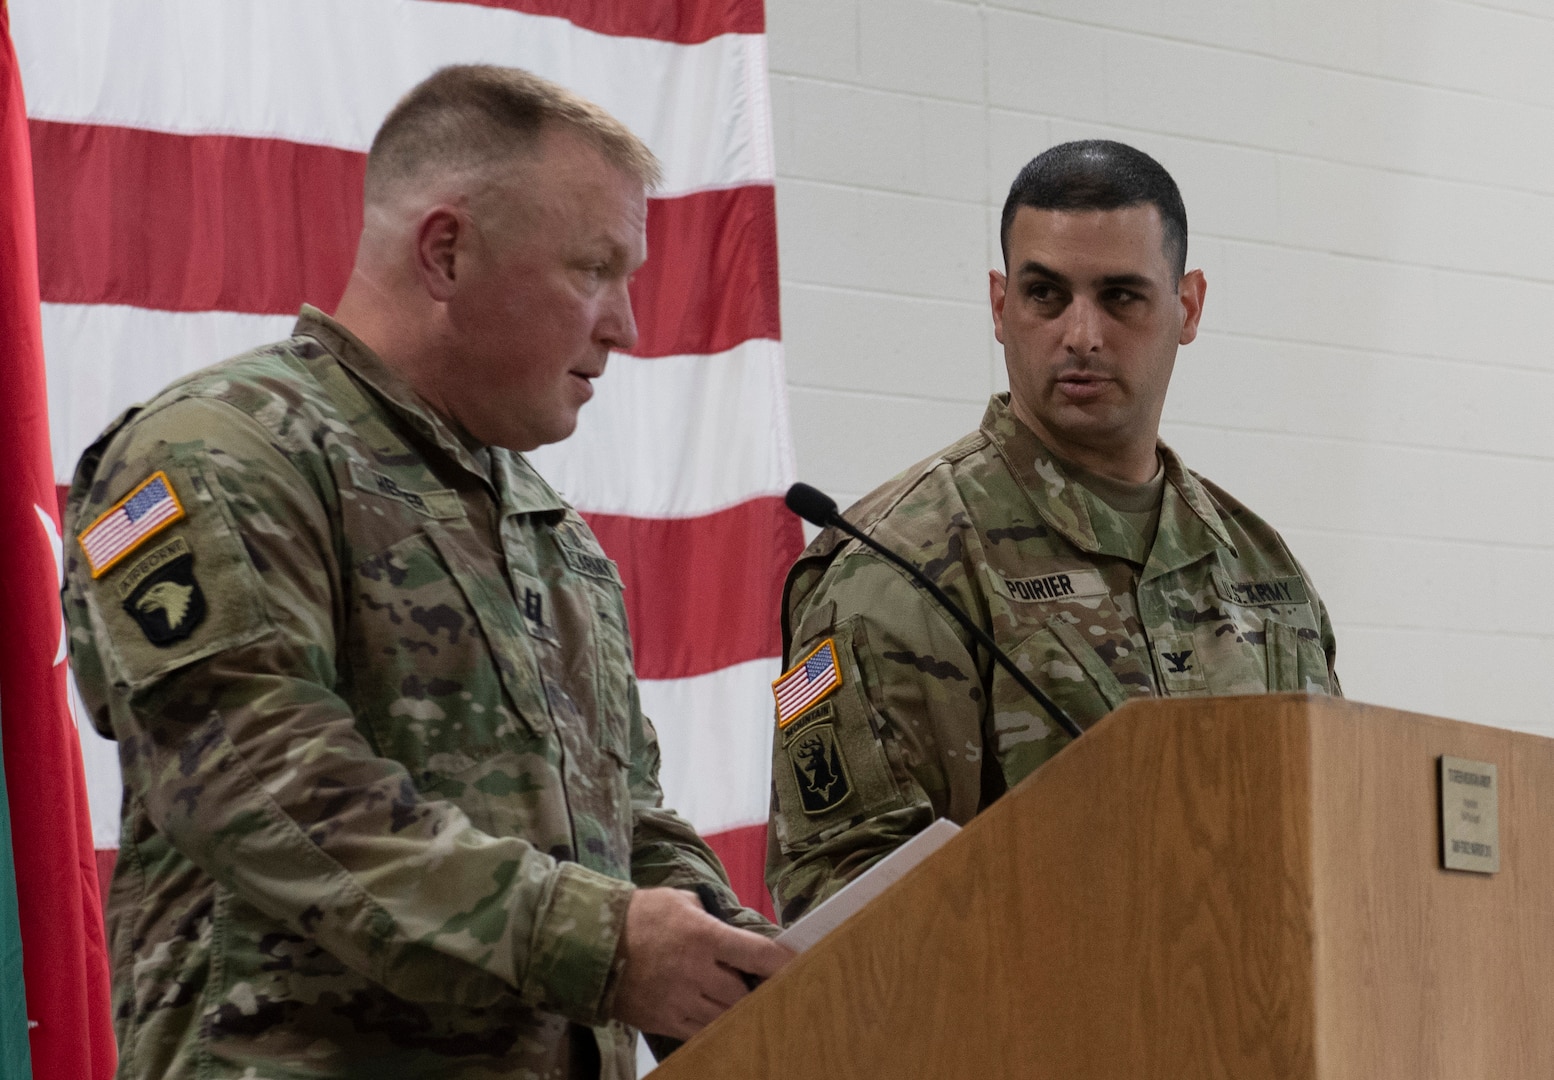 Col. Leonard Poirier (right), officer in charge of Task Force Mansfield, and Capt. Mathew Hefner, an administrative officer in the Vermont National Guard’s operations directorate, review a rehearsal for Task Force Mansfield’s sendoff ceremony May 18, 2021, at Camp Johnson, Vermont. Approximately 50 guests attended the ceremony, the last one of several that have seen the deployment of more than 1,000 Vermont National Guard Soldiers. (U.S. Army National Guard photo by Don Branum)